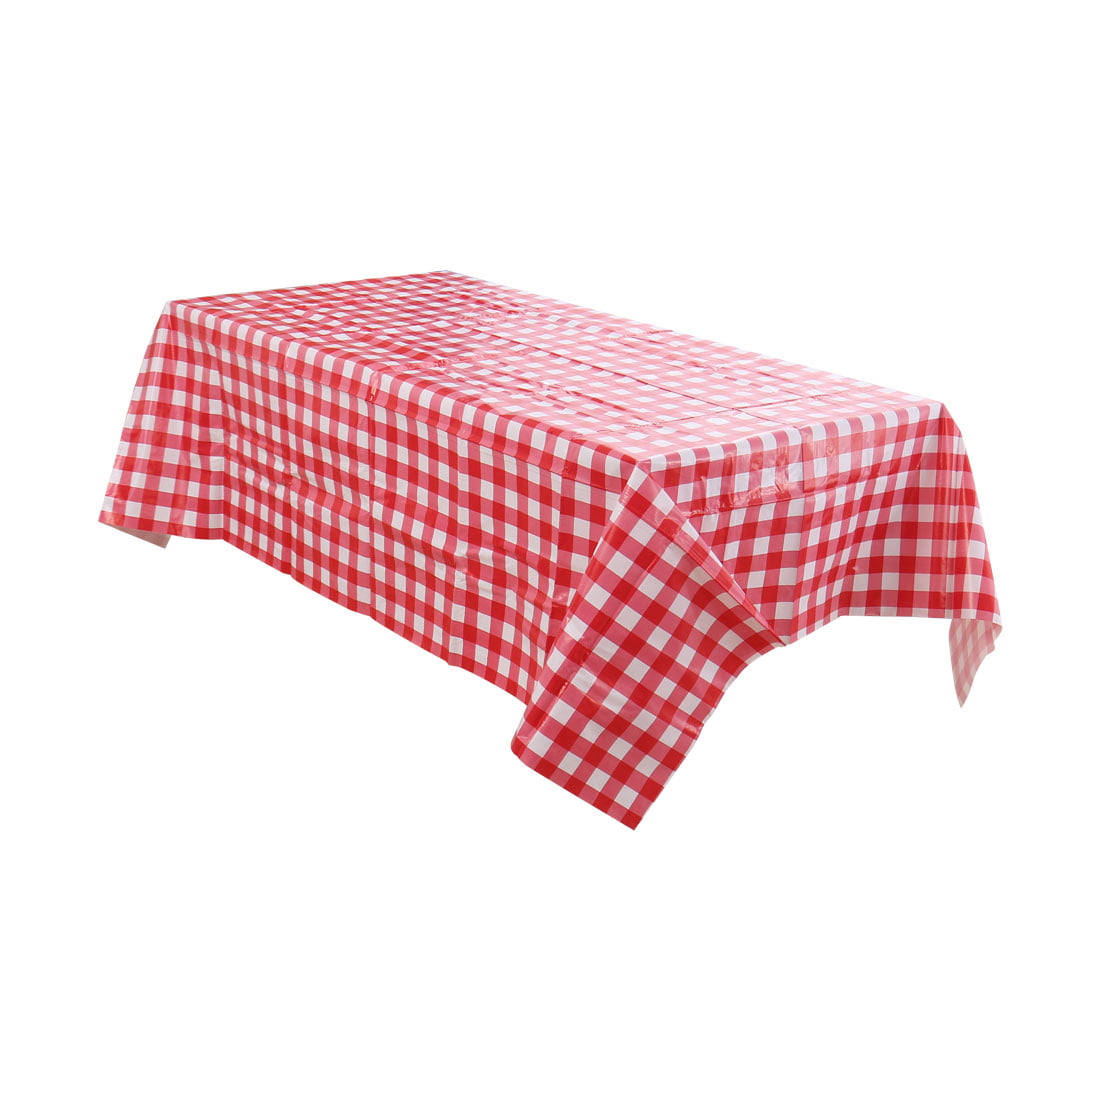 Flannel-Backed Wipe Clean PVC Vinyl Tablecloth Dining Kitchen Table Cover Sizes